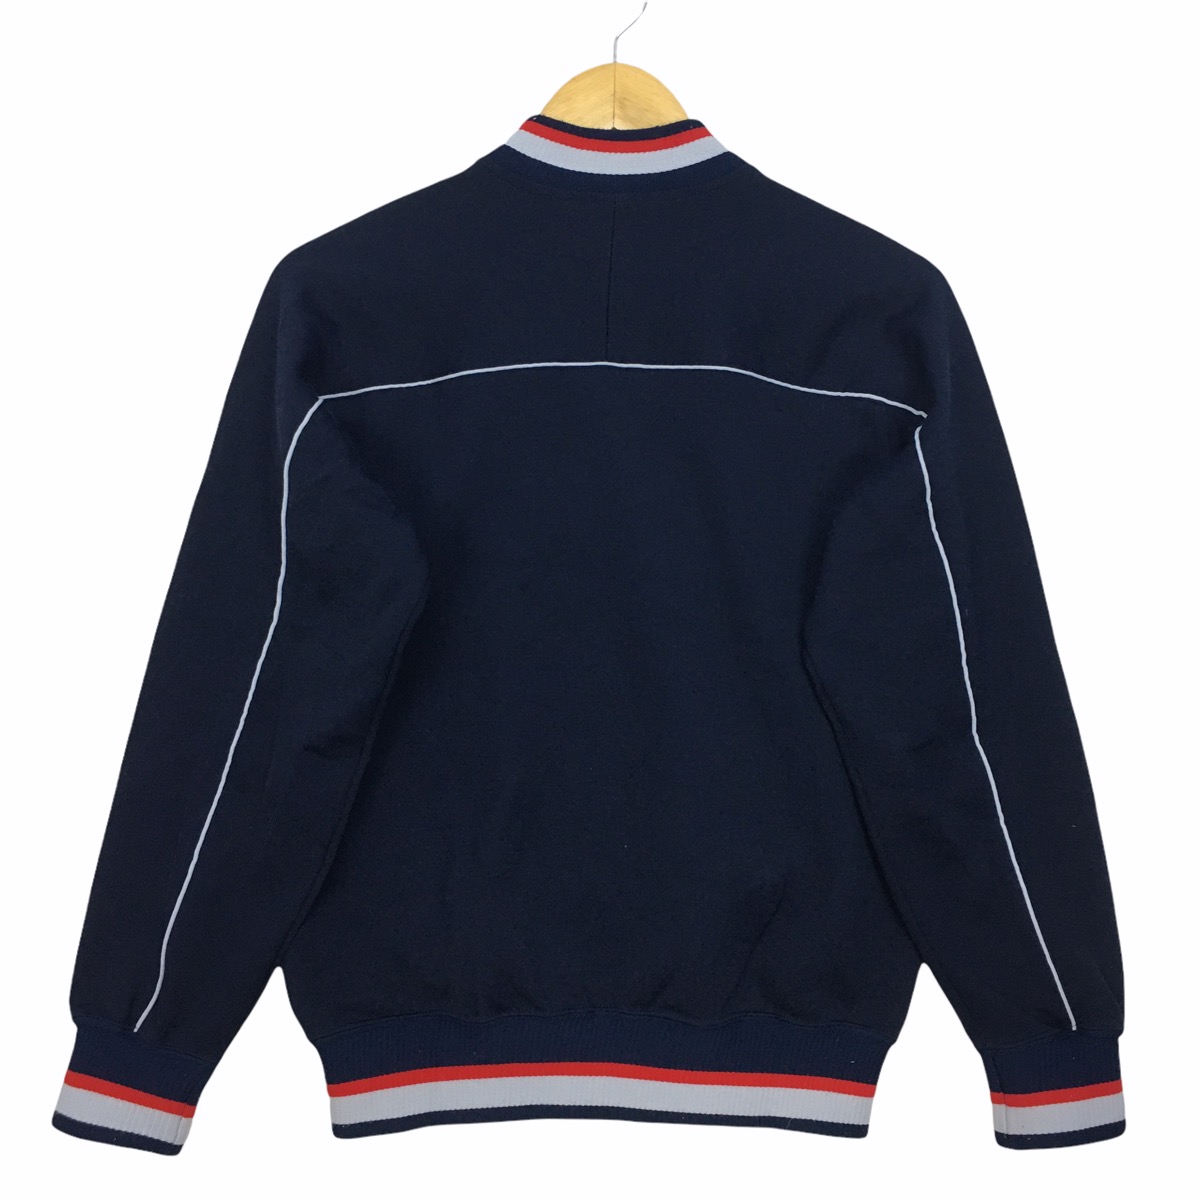 ASICS Zip Up Sweater Streetwear Clothing Made in Japan - 6